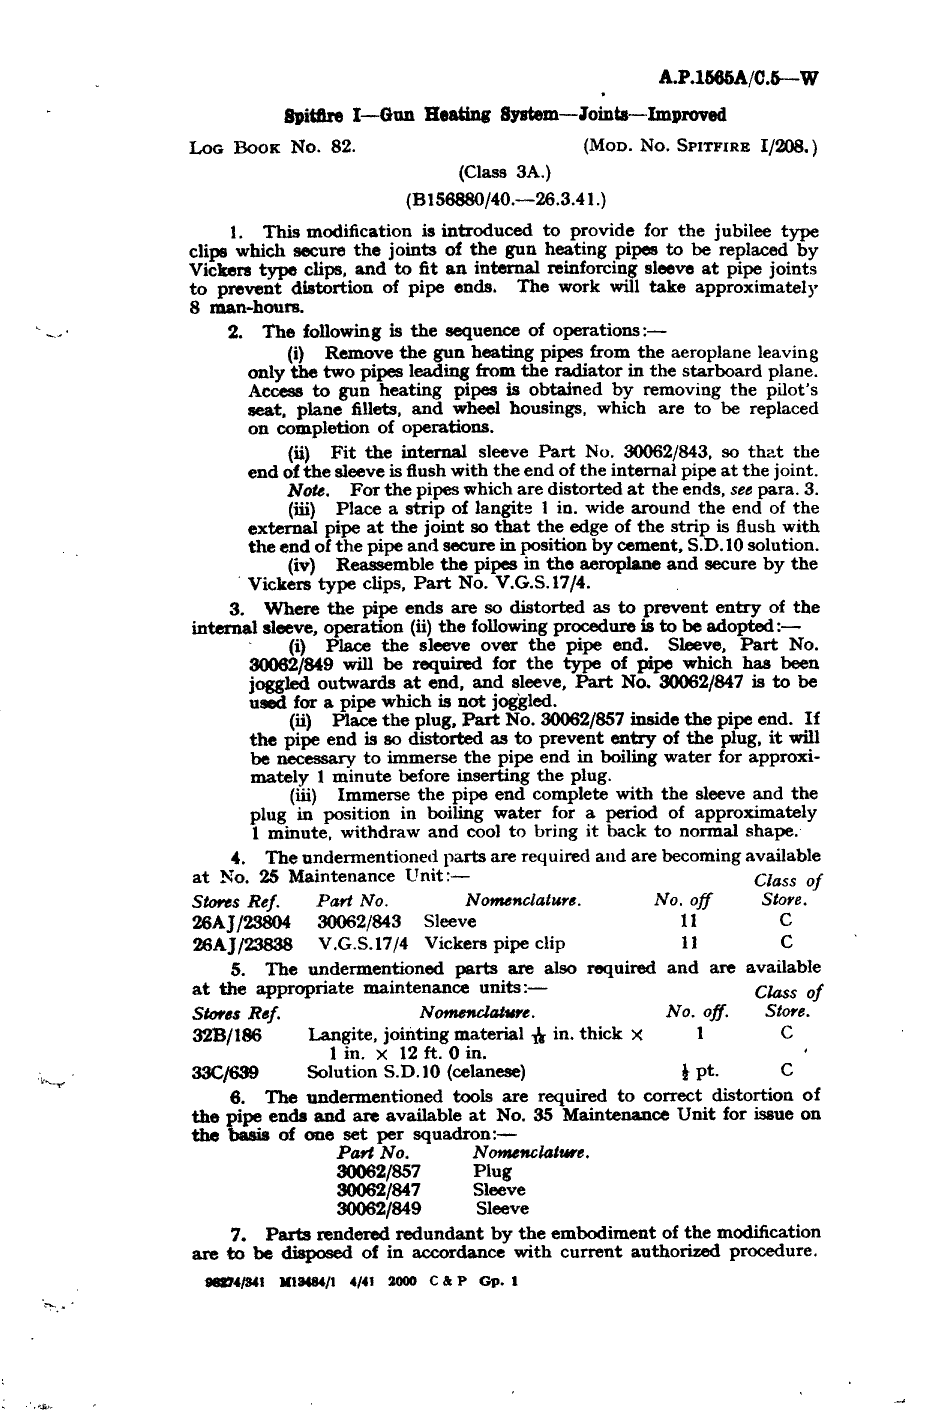 Sample page 1 from AirCorps Library document: Spitfire I Gun Heating System Joints Approved